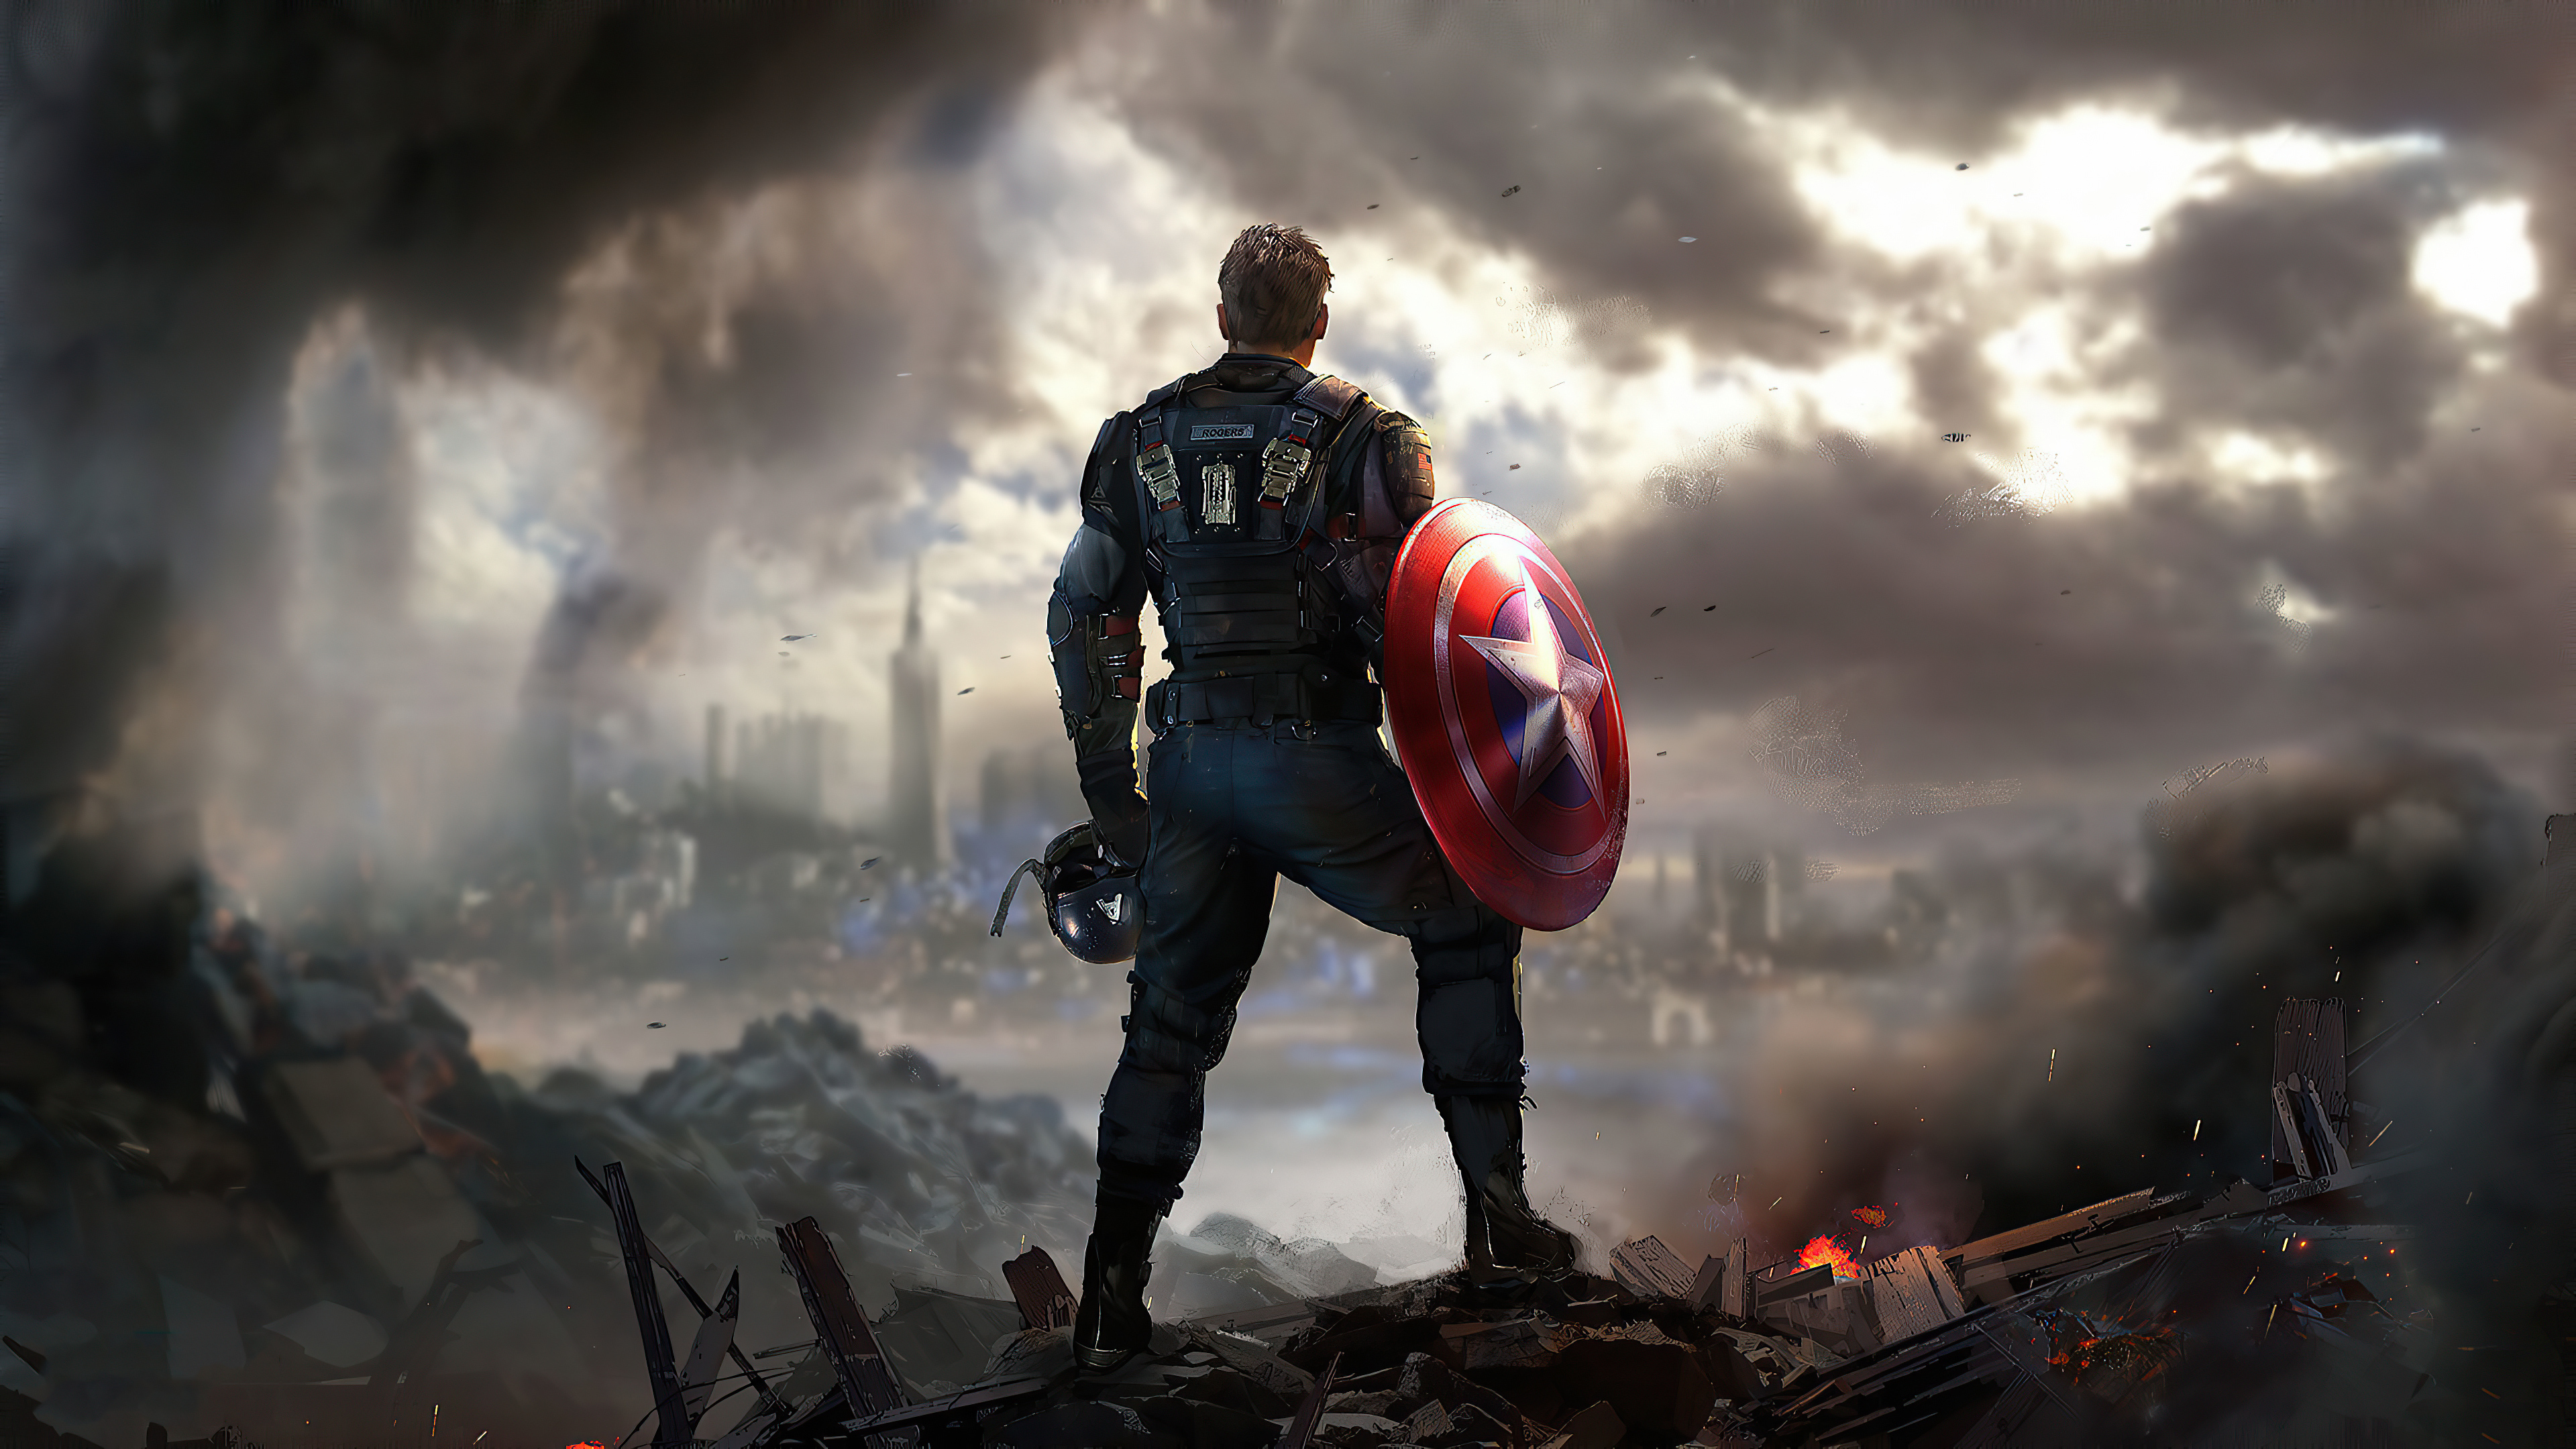 Download wallpaper 3840x2160 captain america, marvel's avengers, first avenger  4k wallpaper, uhd wallpaper, 16:9 widescreen 3840x2160 hd background, 25946